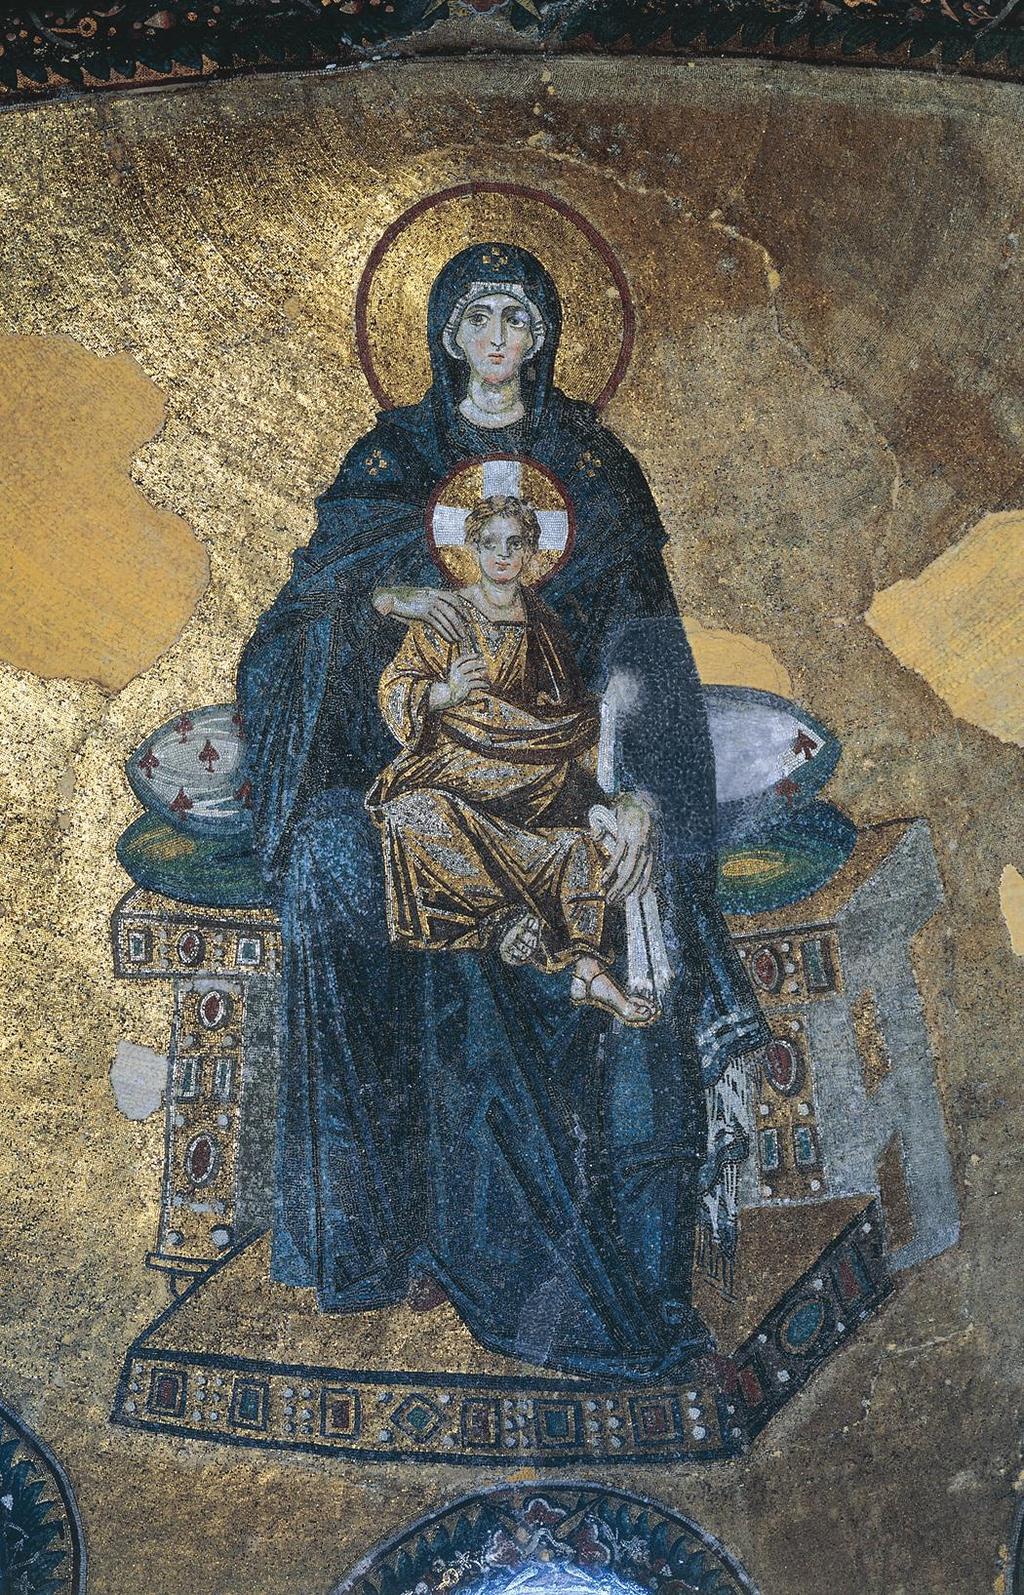 #52 Theotokos and Child Early Byzantine Constantinople (Istanbul), 535ce Commissioned the mosaic to replace one the imposters (iconoclasts) had destroyed Echoes